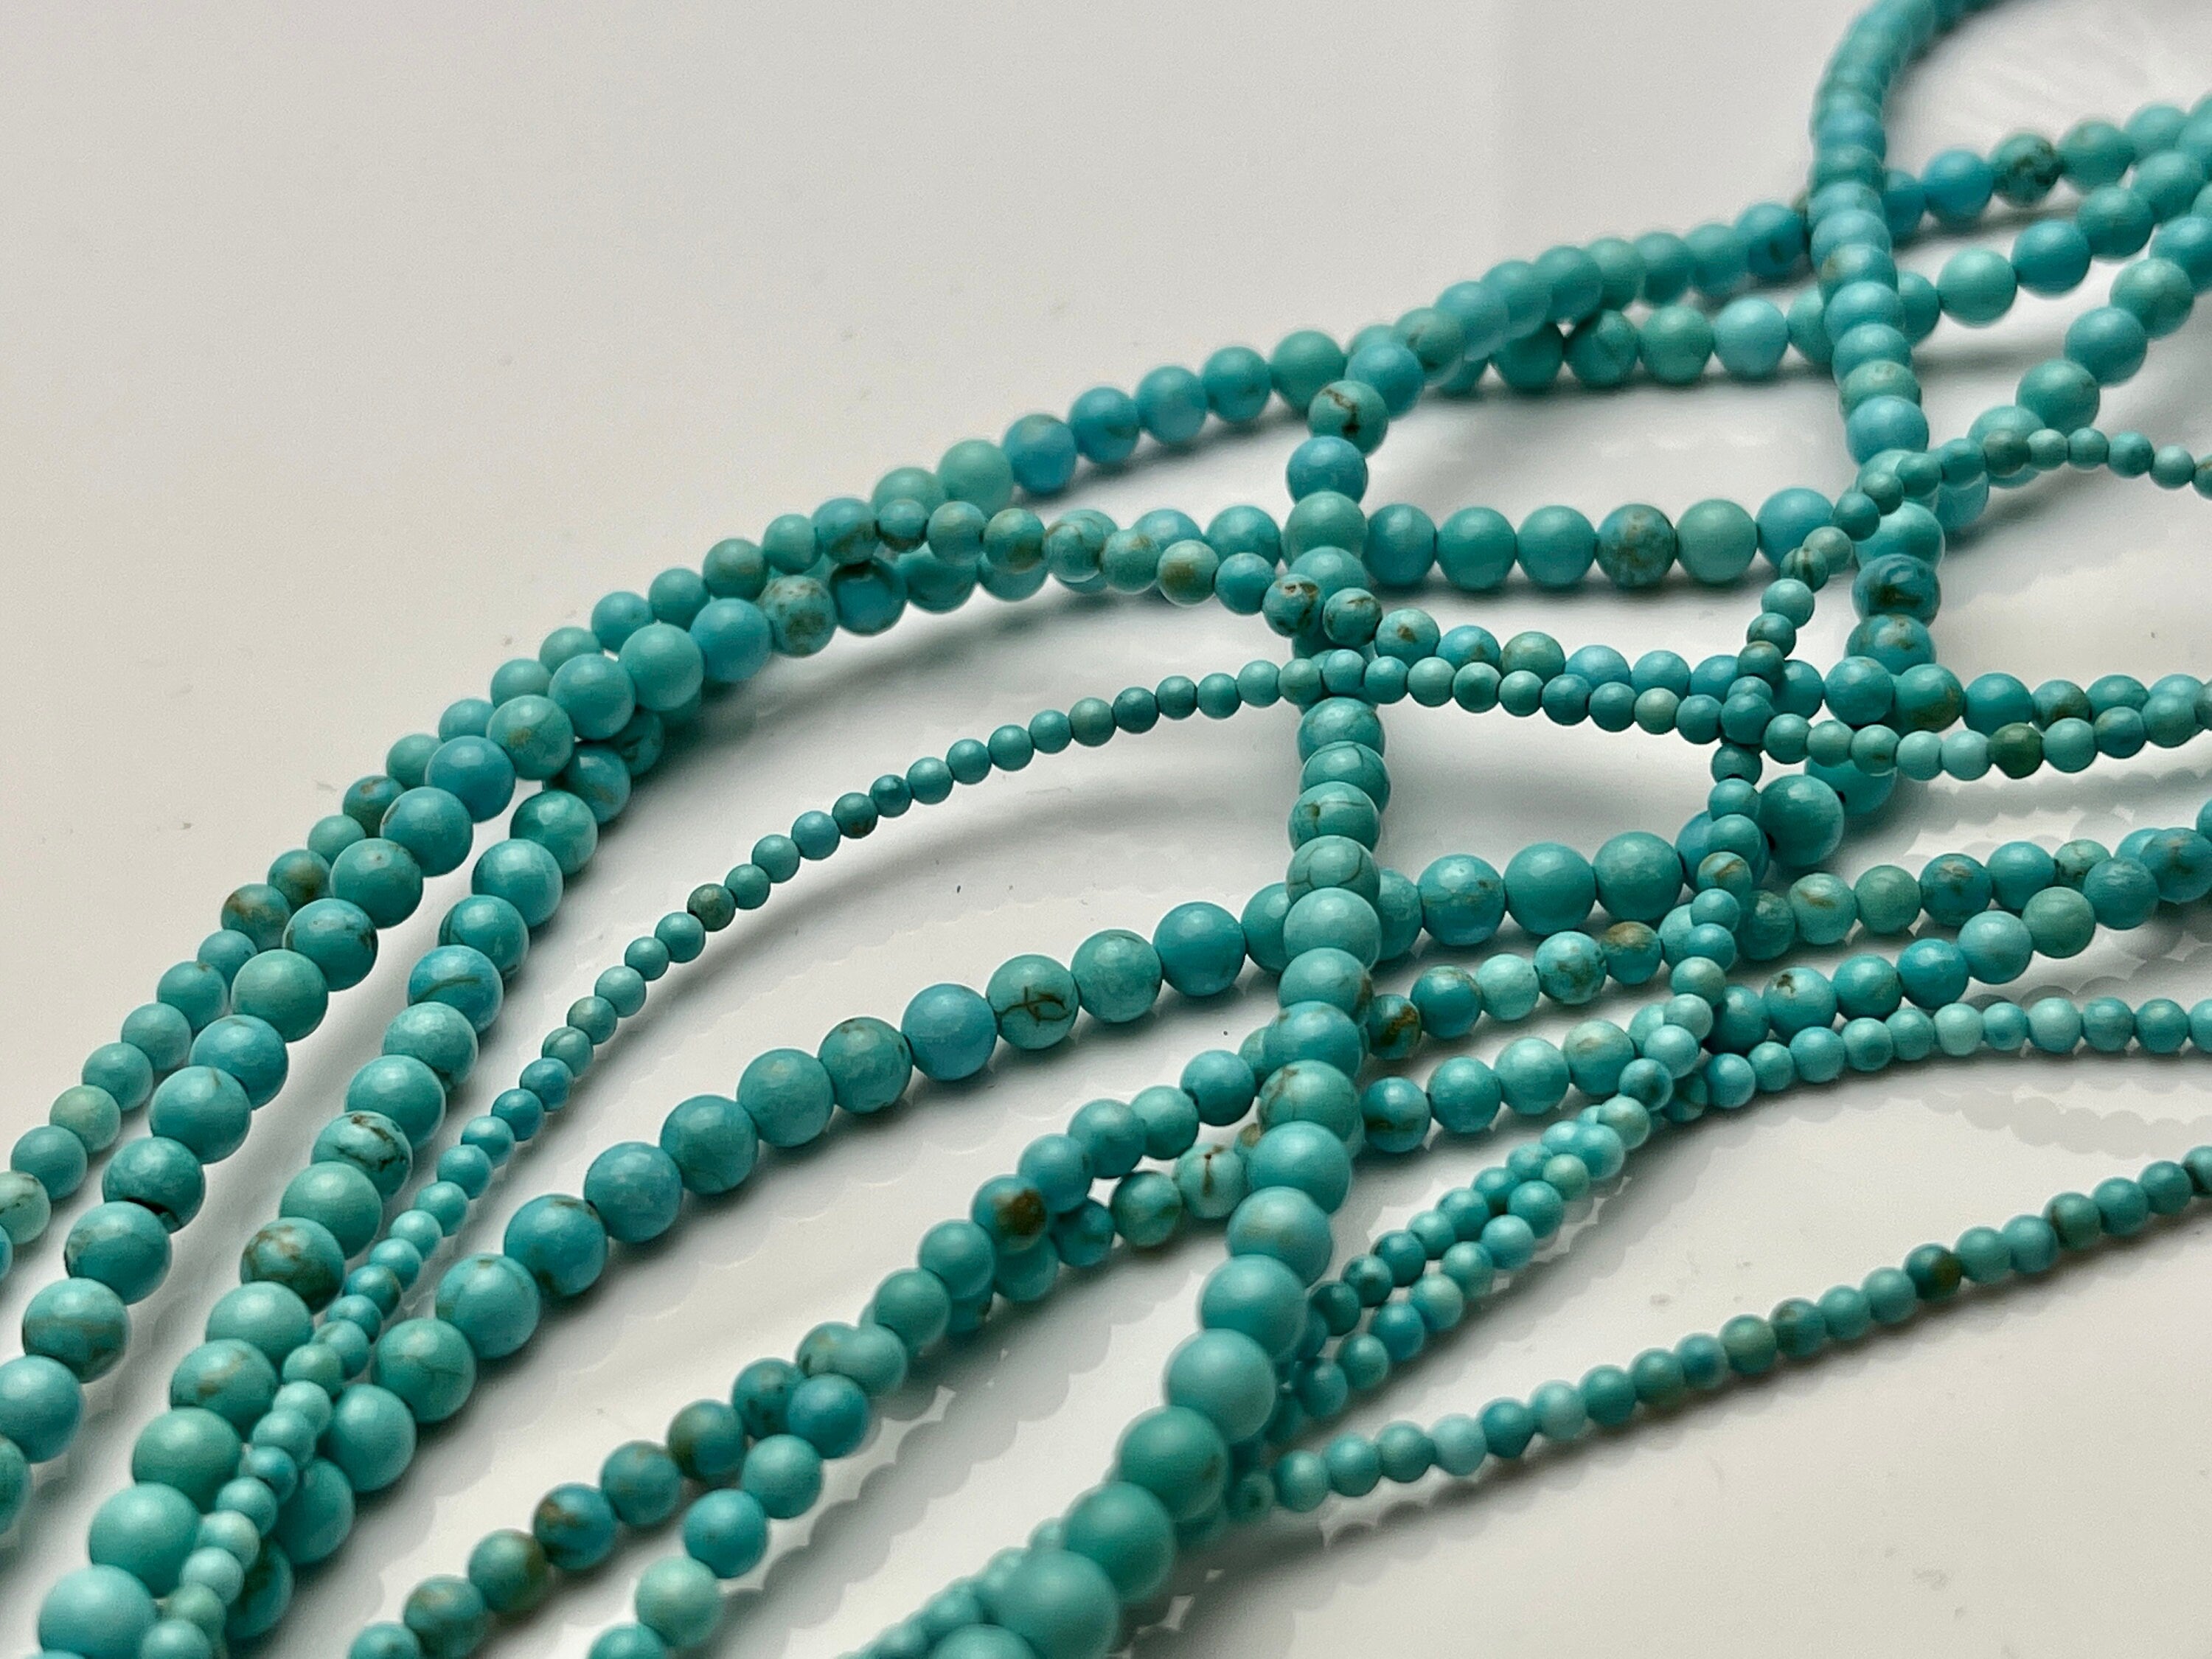 Natural Turquoise Gemstone Round 2MM 3MM 6MM Loose Beads (P84) – DayBeads